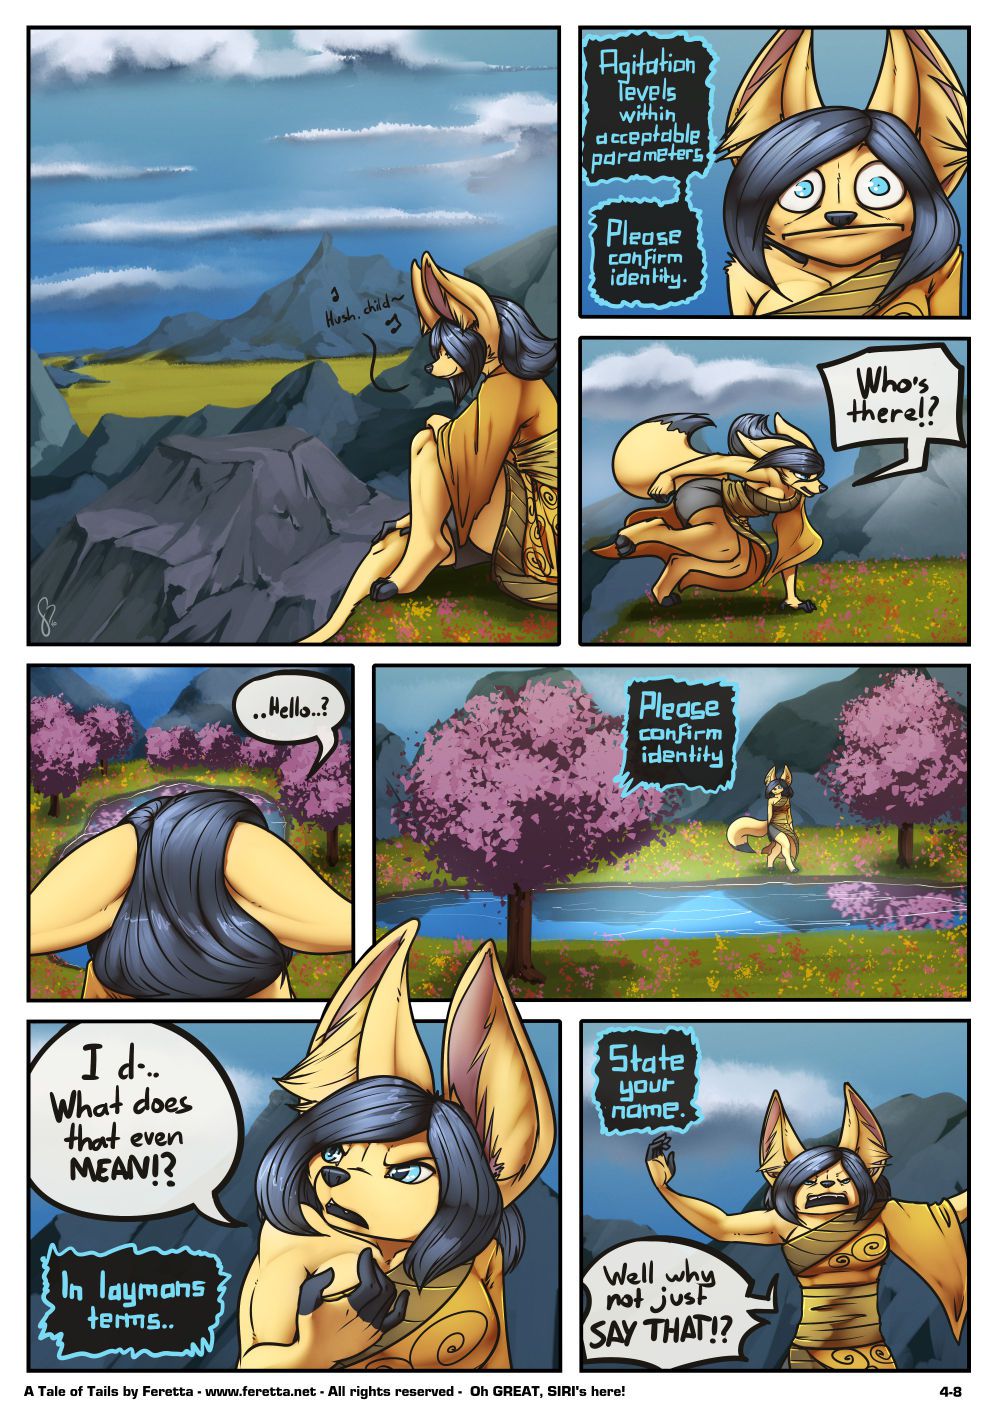 [Feretta] A Tale of Tails: Chapter 4 -  Matters of the mind [Ongoing] 8